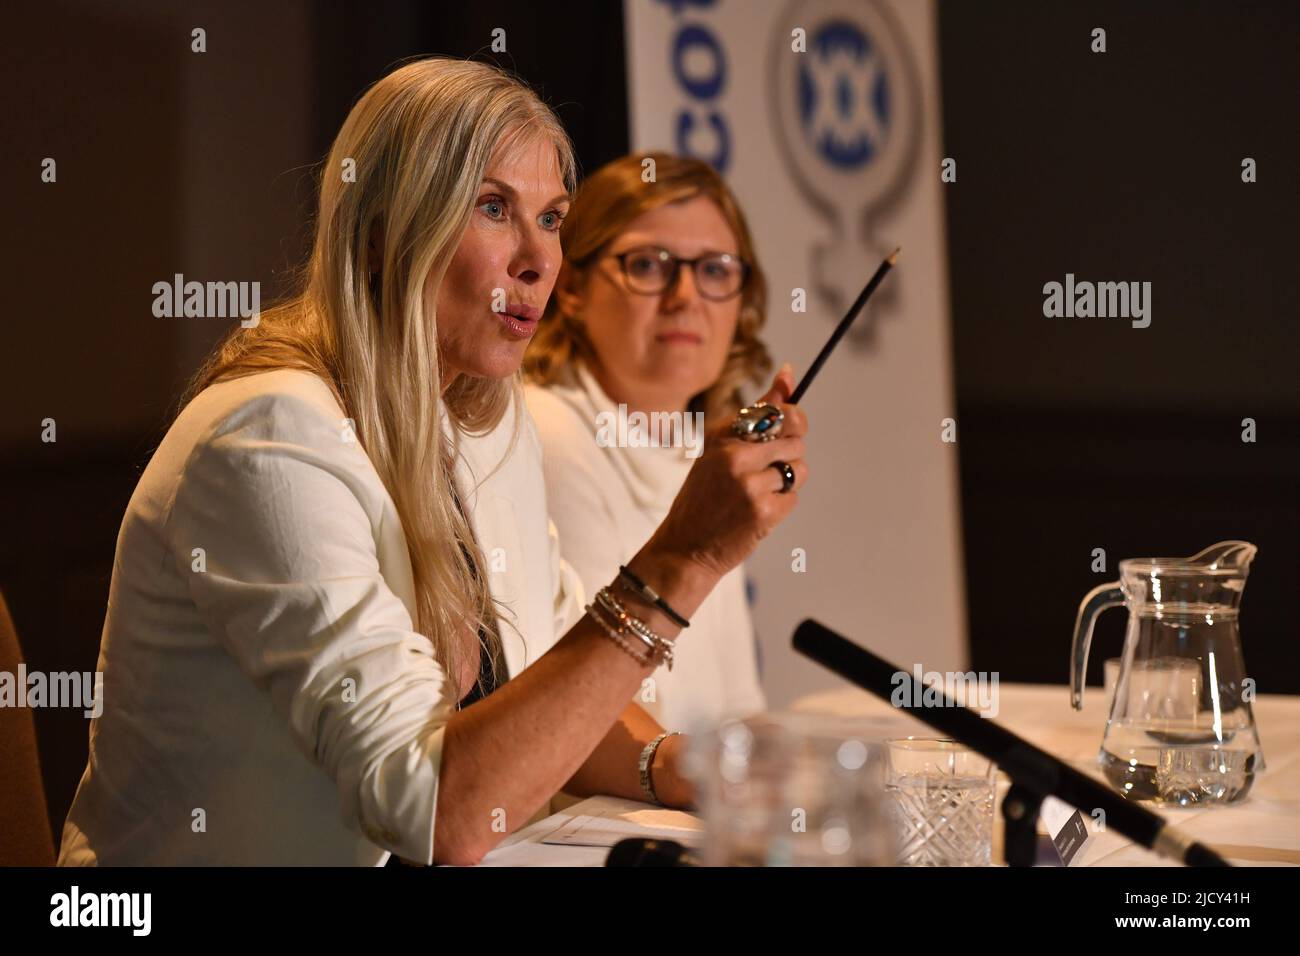 Edinburgh, Scotland, UK. 16 June 2022. PICTURED: Sharron Davies MBE. Female Olympians Sharron Davies and Mara Yamauchi today visited Edinburgh to call on members of the Scottish Parliament to ensure the integrity of female sporting categories. The Scottish Parliament is currently considering draft legislation - the Gender Recognition Reform (Scotland) Bill - which will allow individuals to change the sex recorded on their birth certificate by simply making a statutory declaration. Currently, someone seeking a Gender Recognition Certificate (GRC) needs to have a diagnosis of gender dysphori Stock Photo